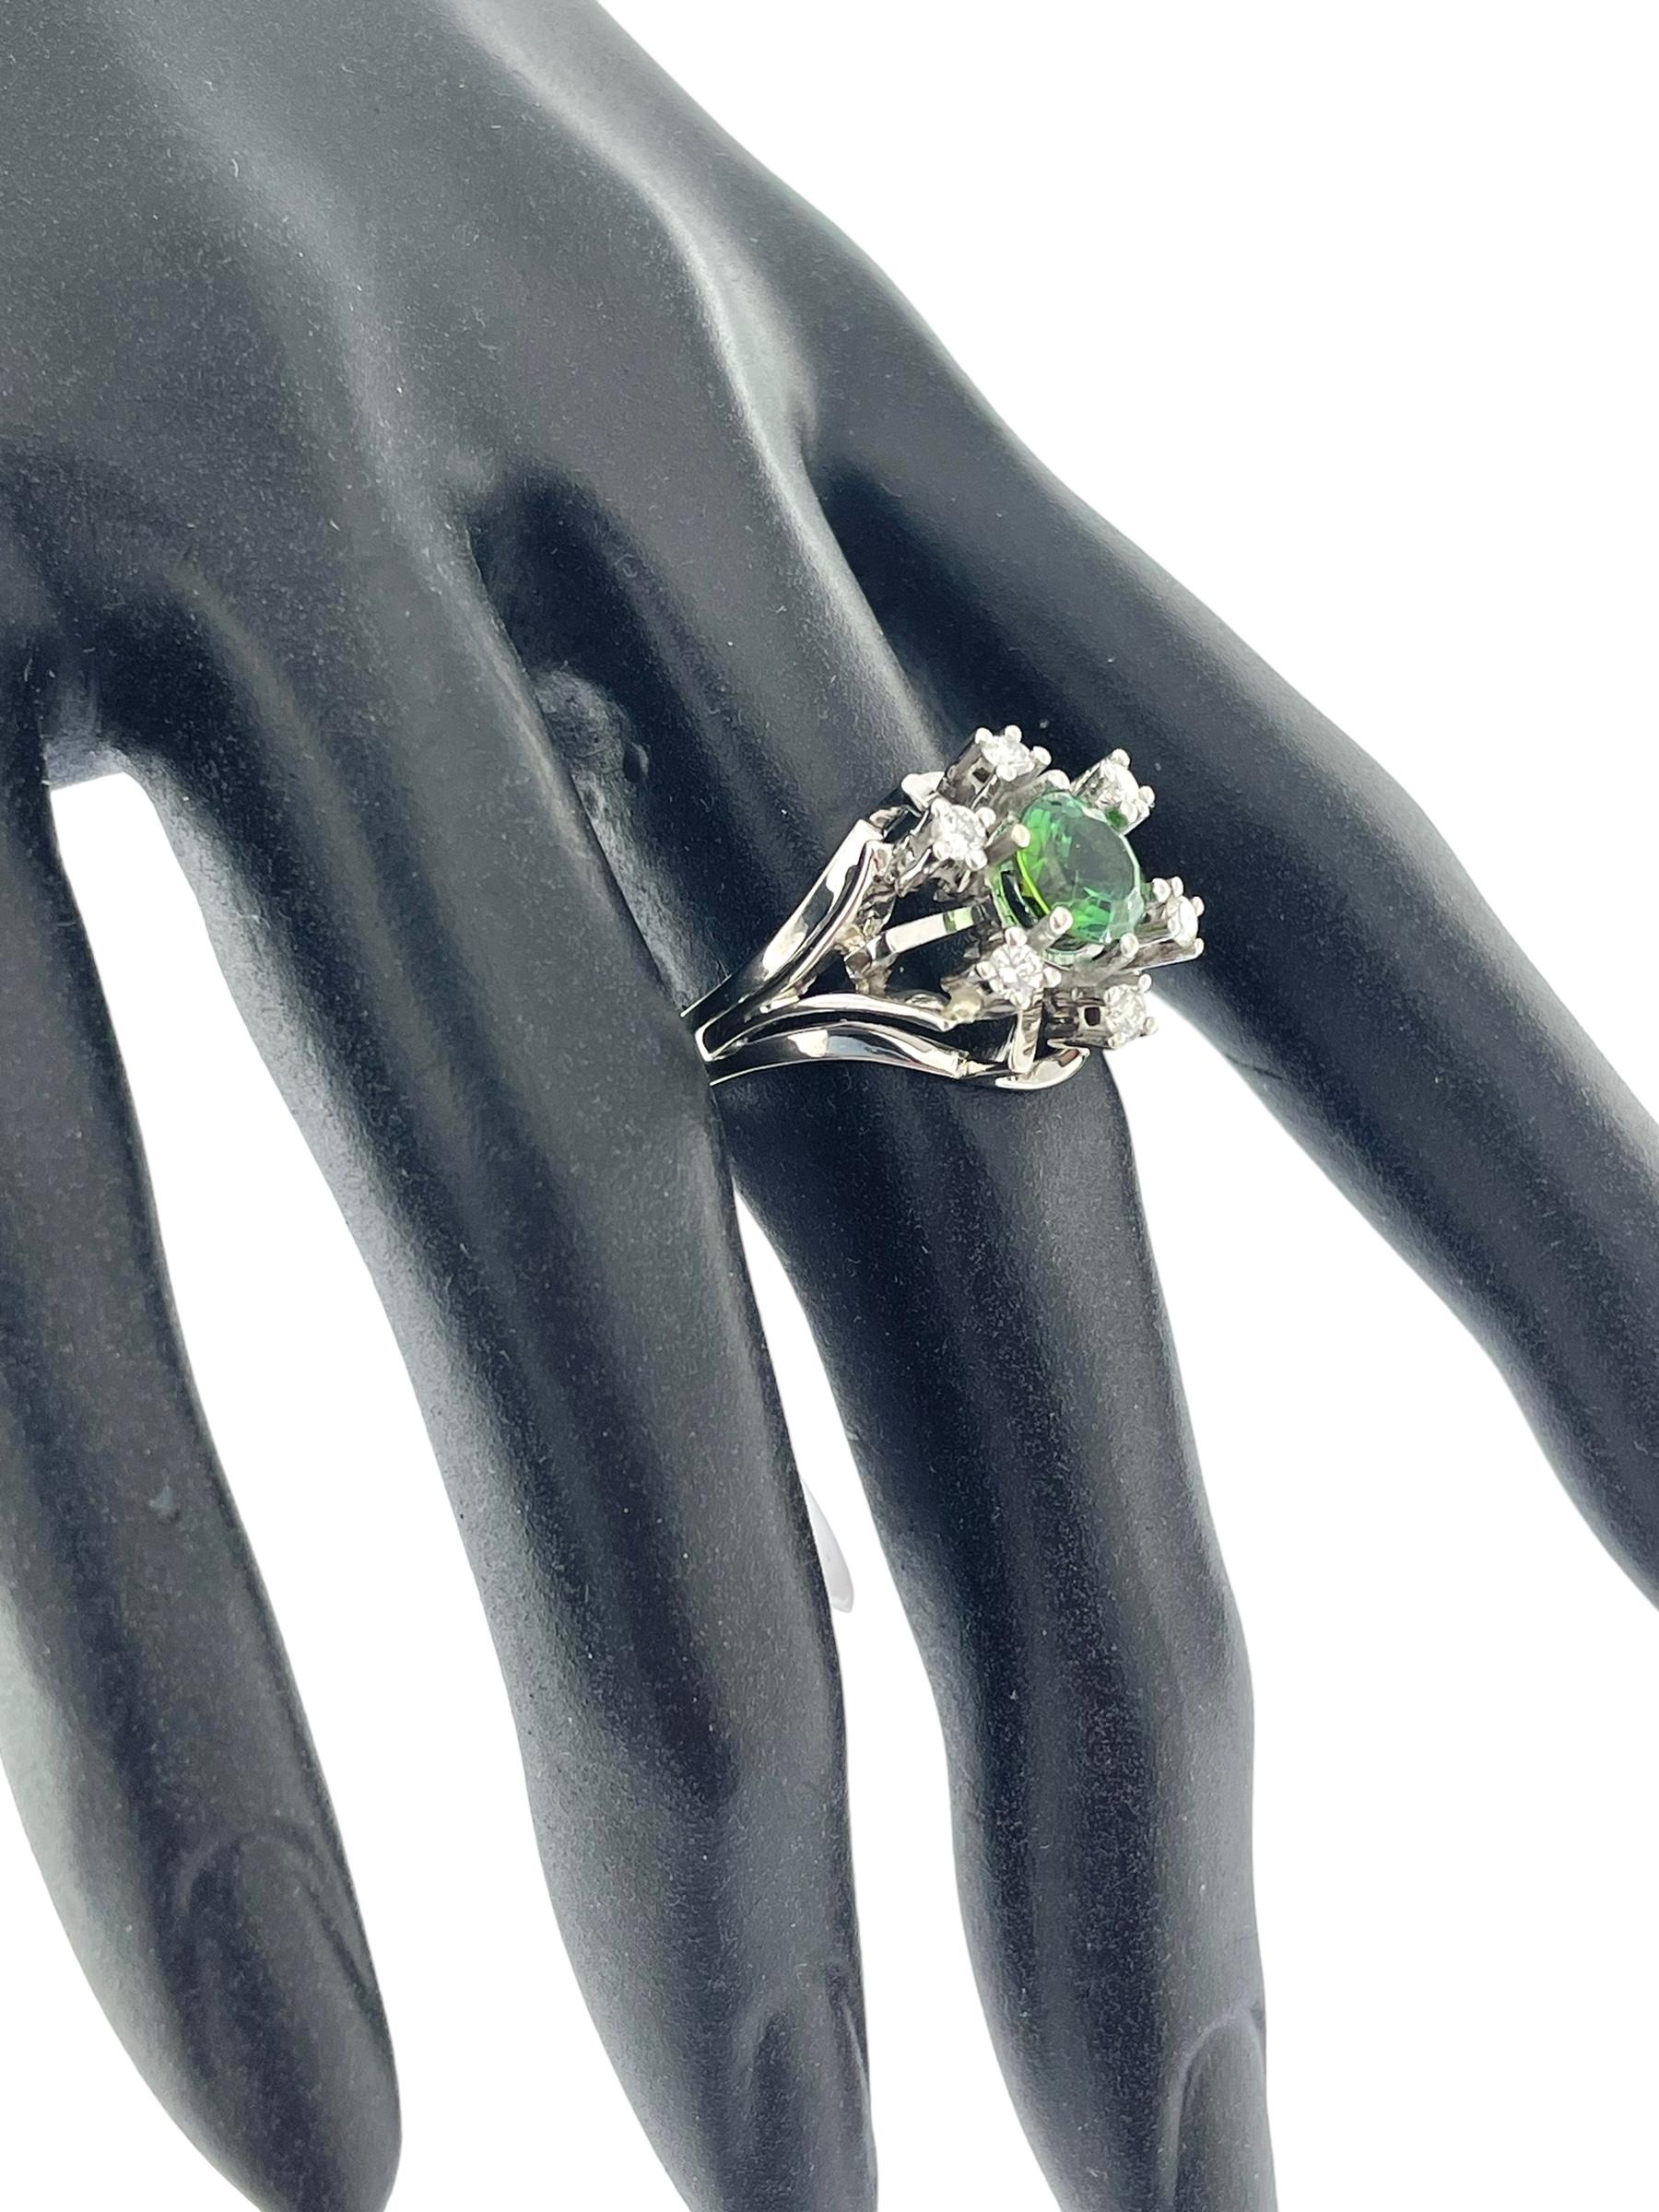 Brilliant Cut IGI Certified White Gold Ring with Verdelite Tourmaline and Diamonds For Sale